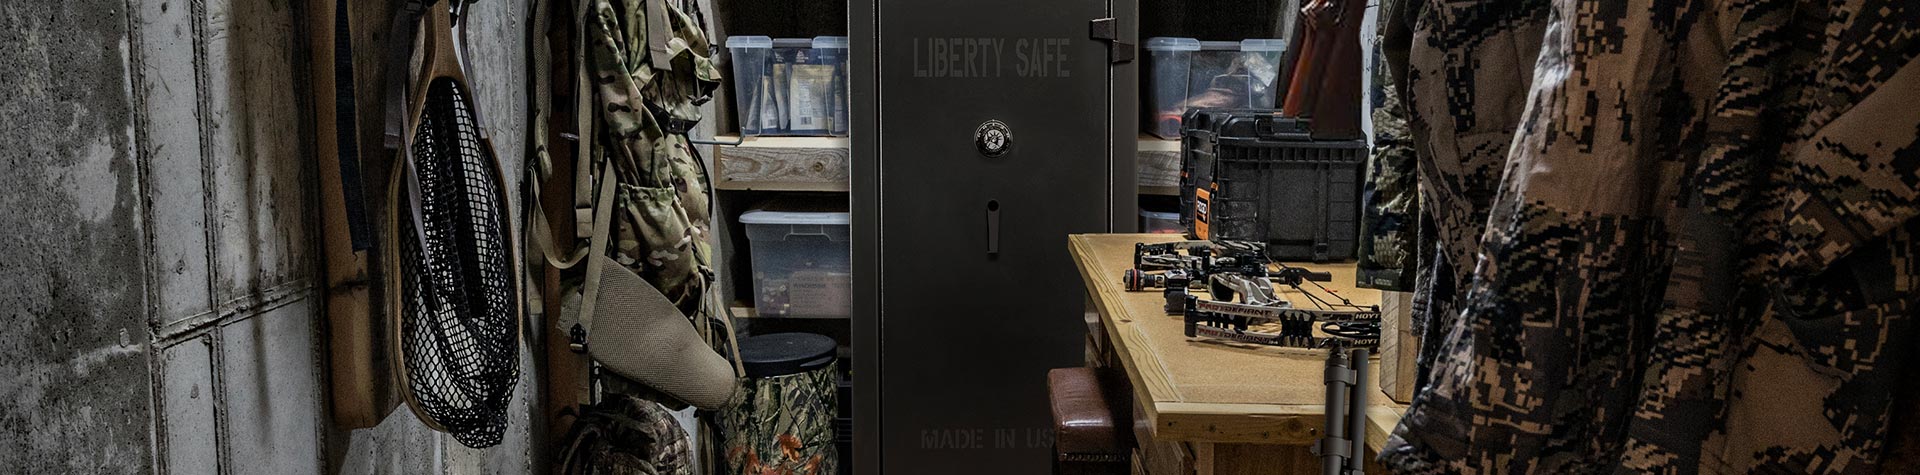 Tactical 24 Gun Safe in Hunting Room